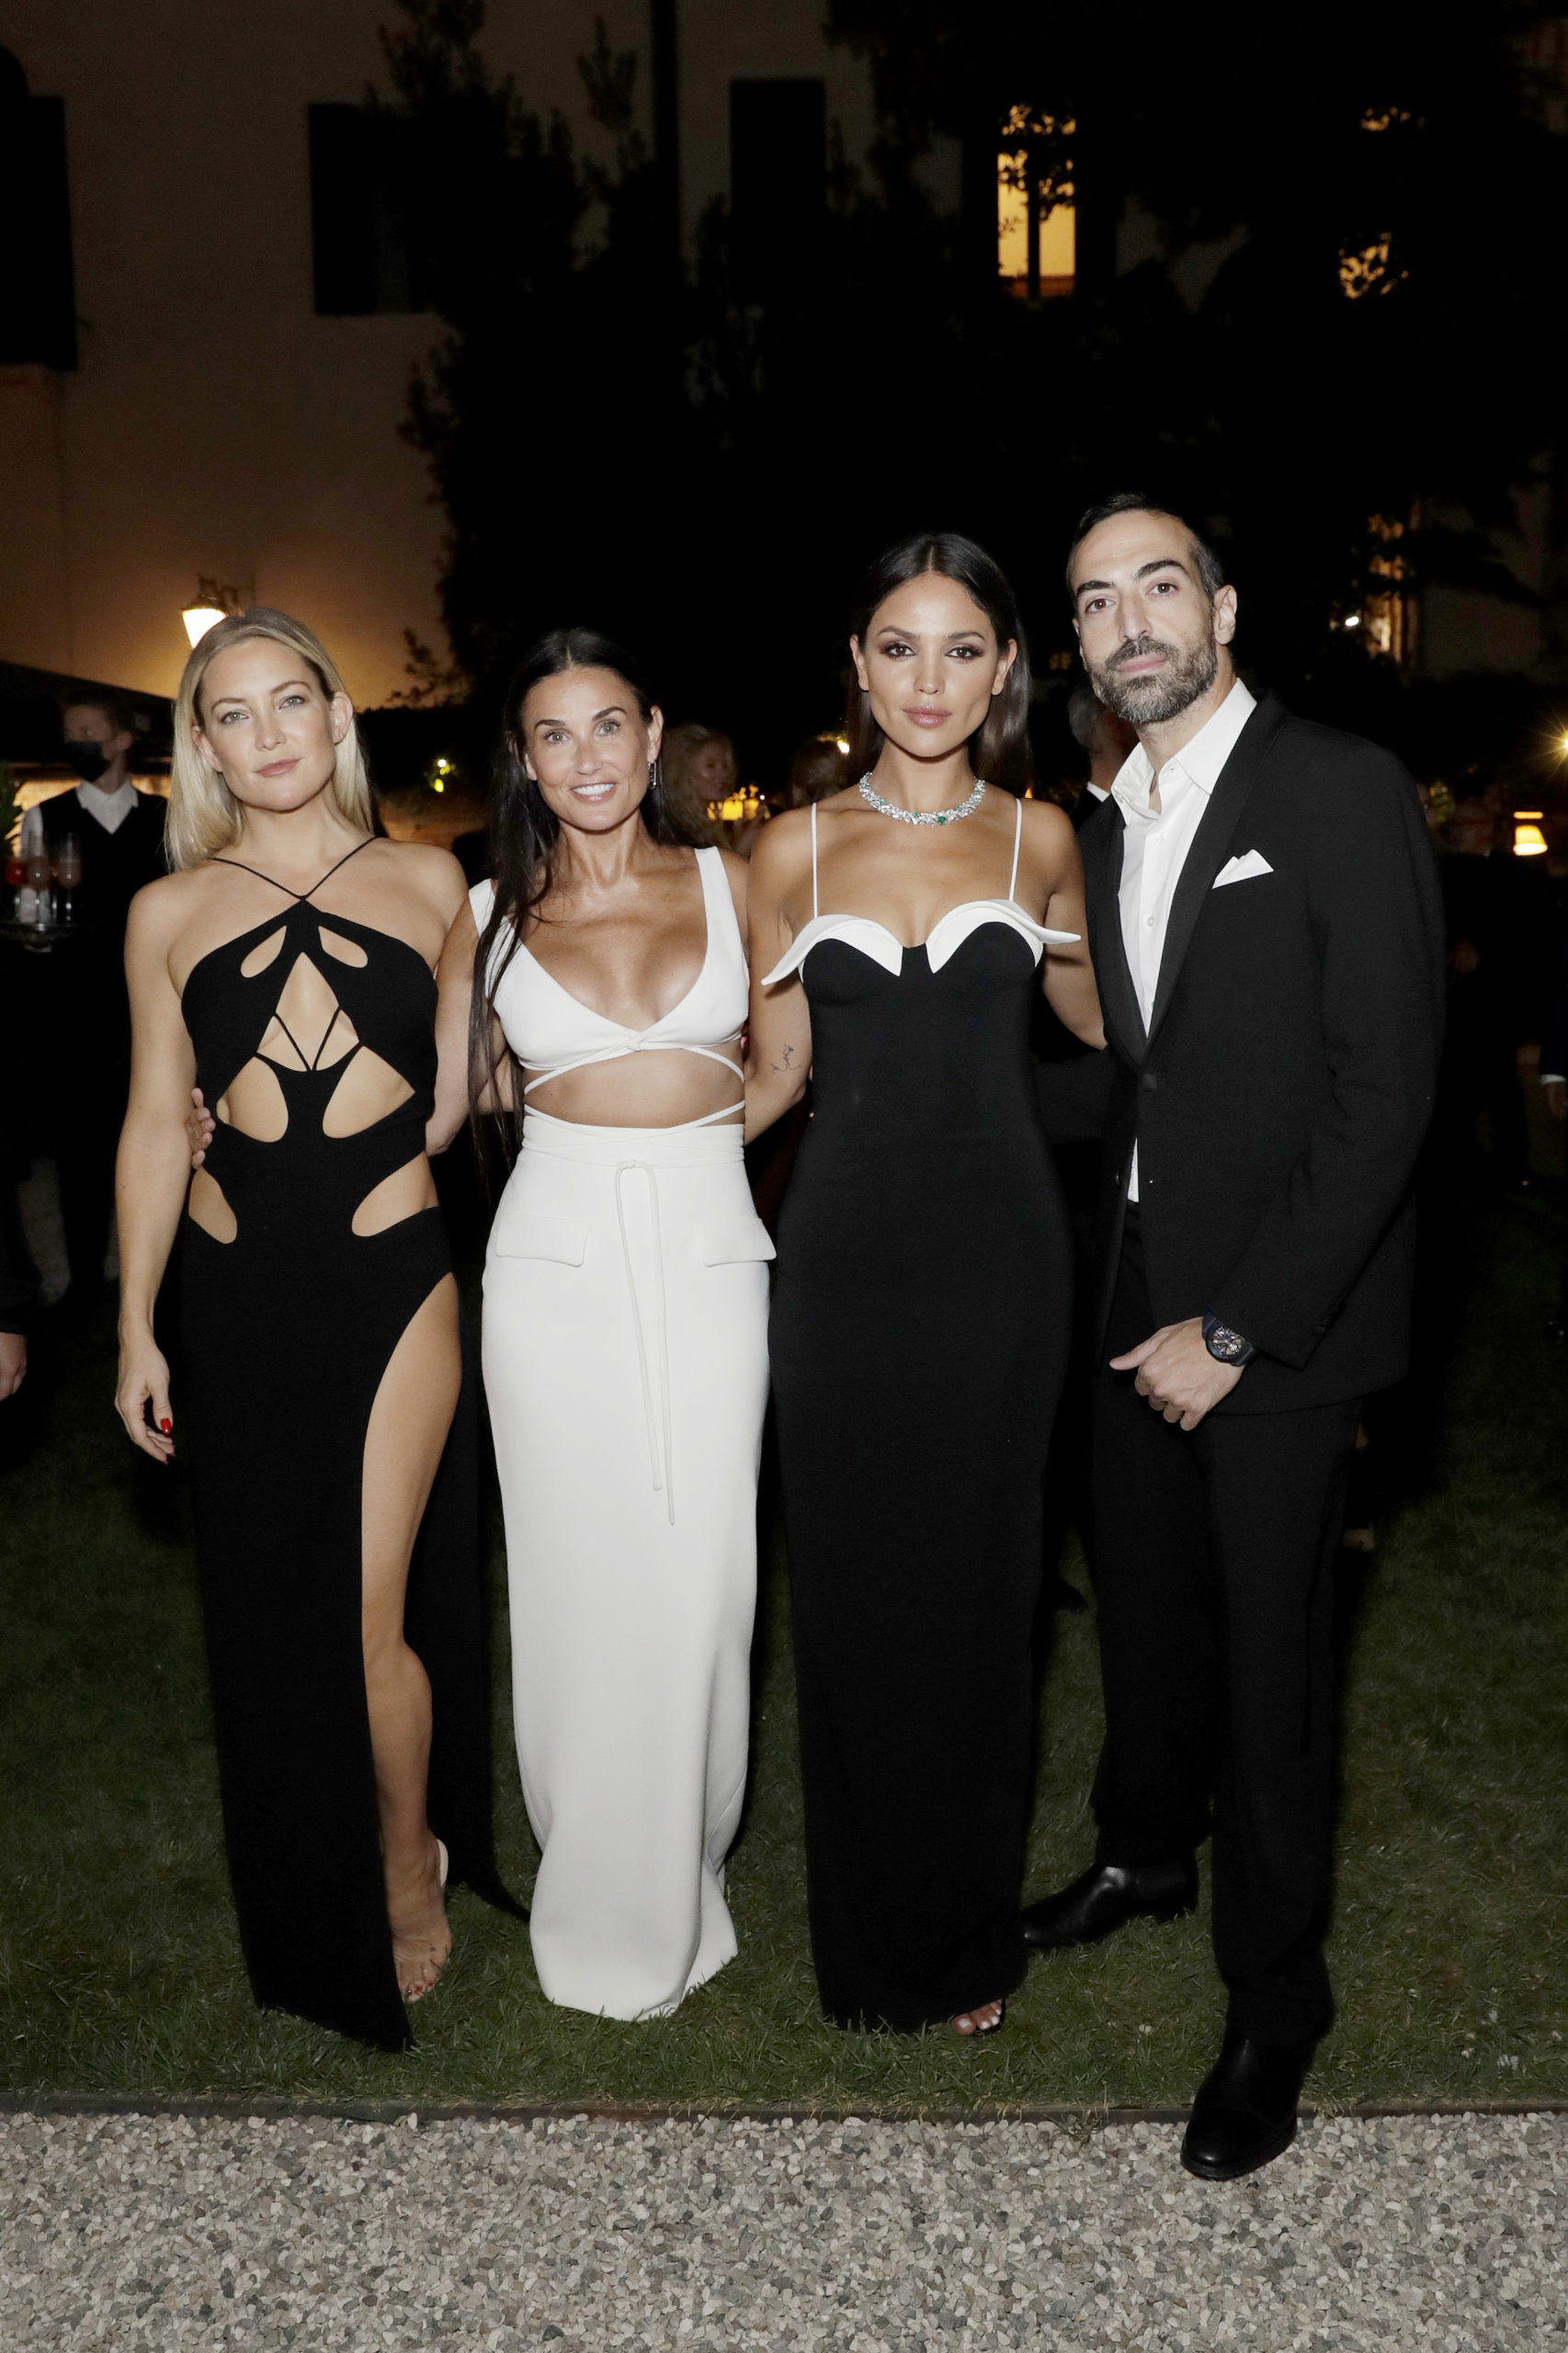  Kate Hudson, Demi Moore, Eiza González, and Mohammed Al Turki, photographed by John Phillips/Getty Images.